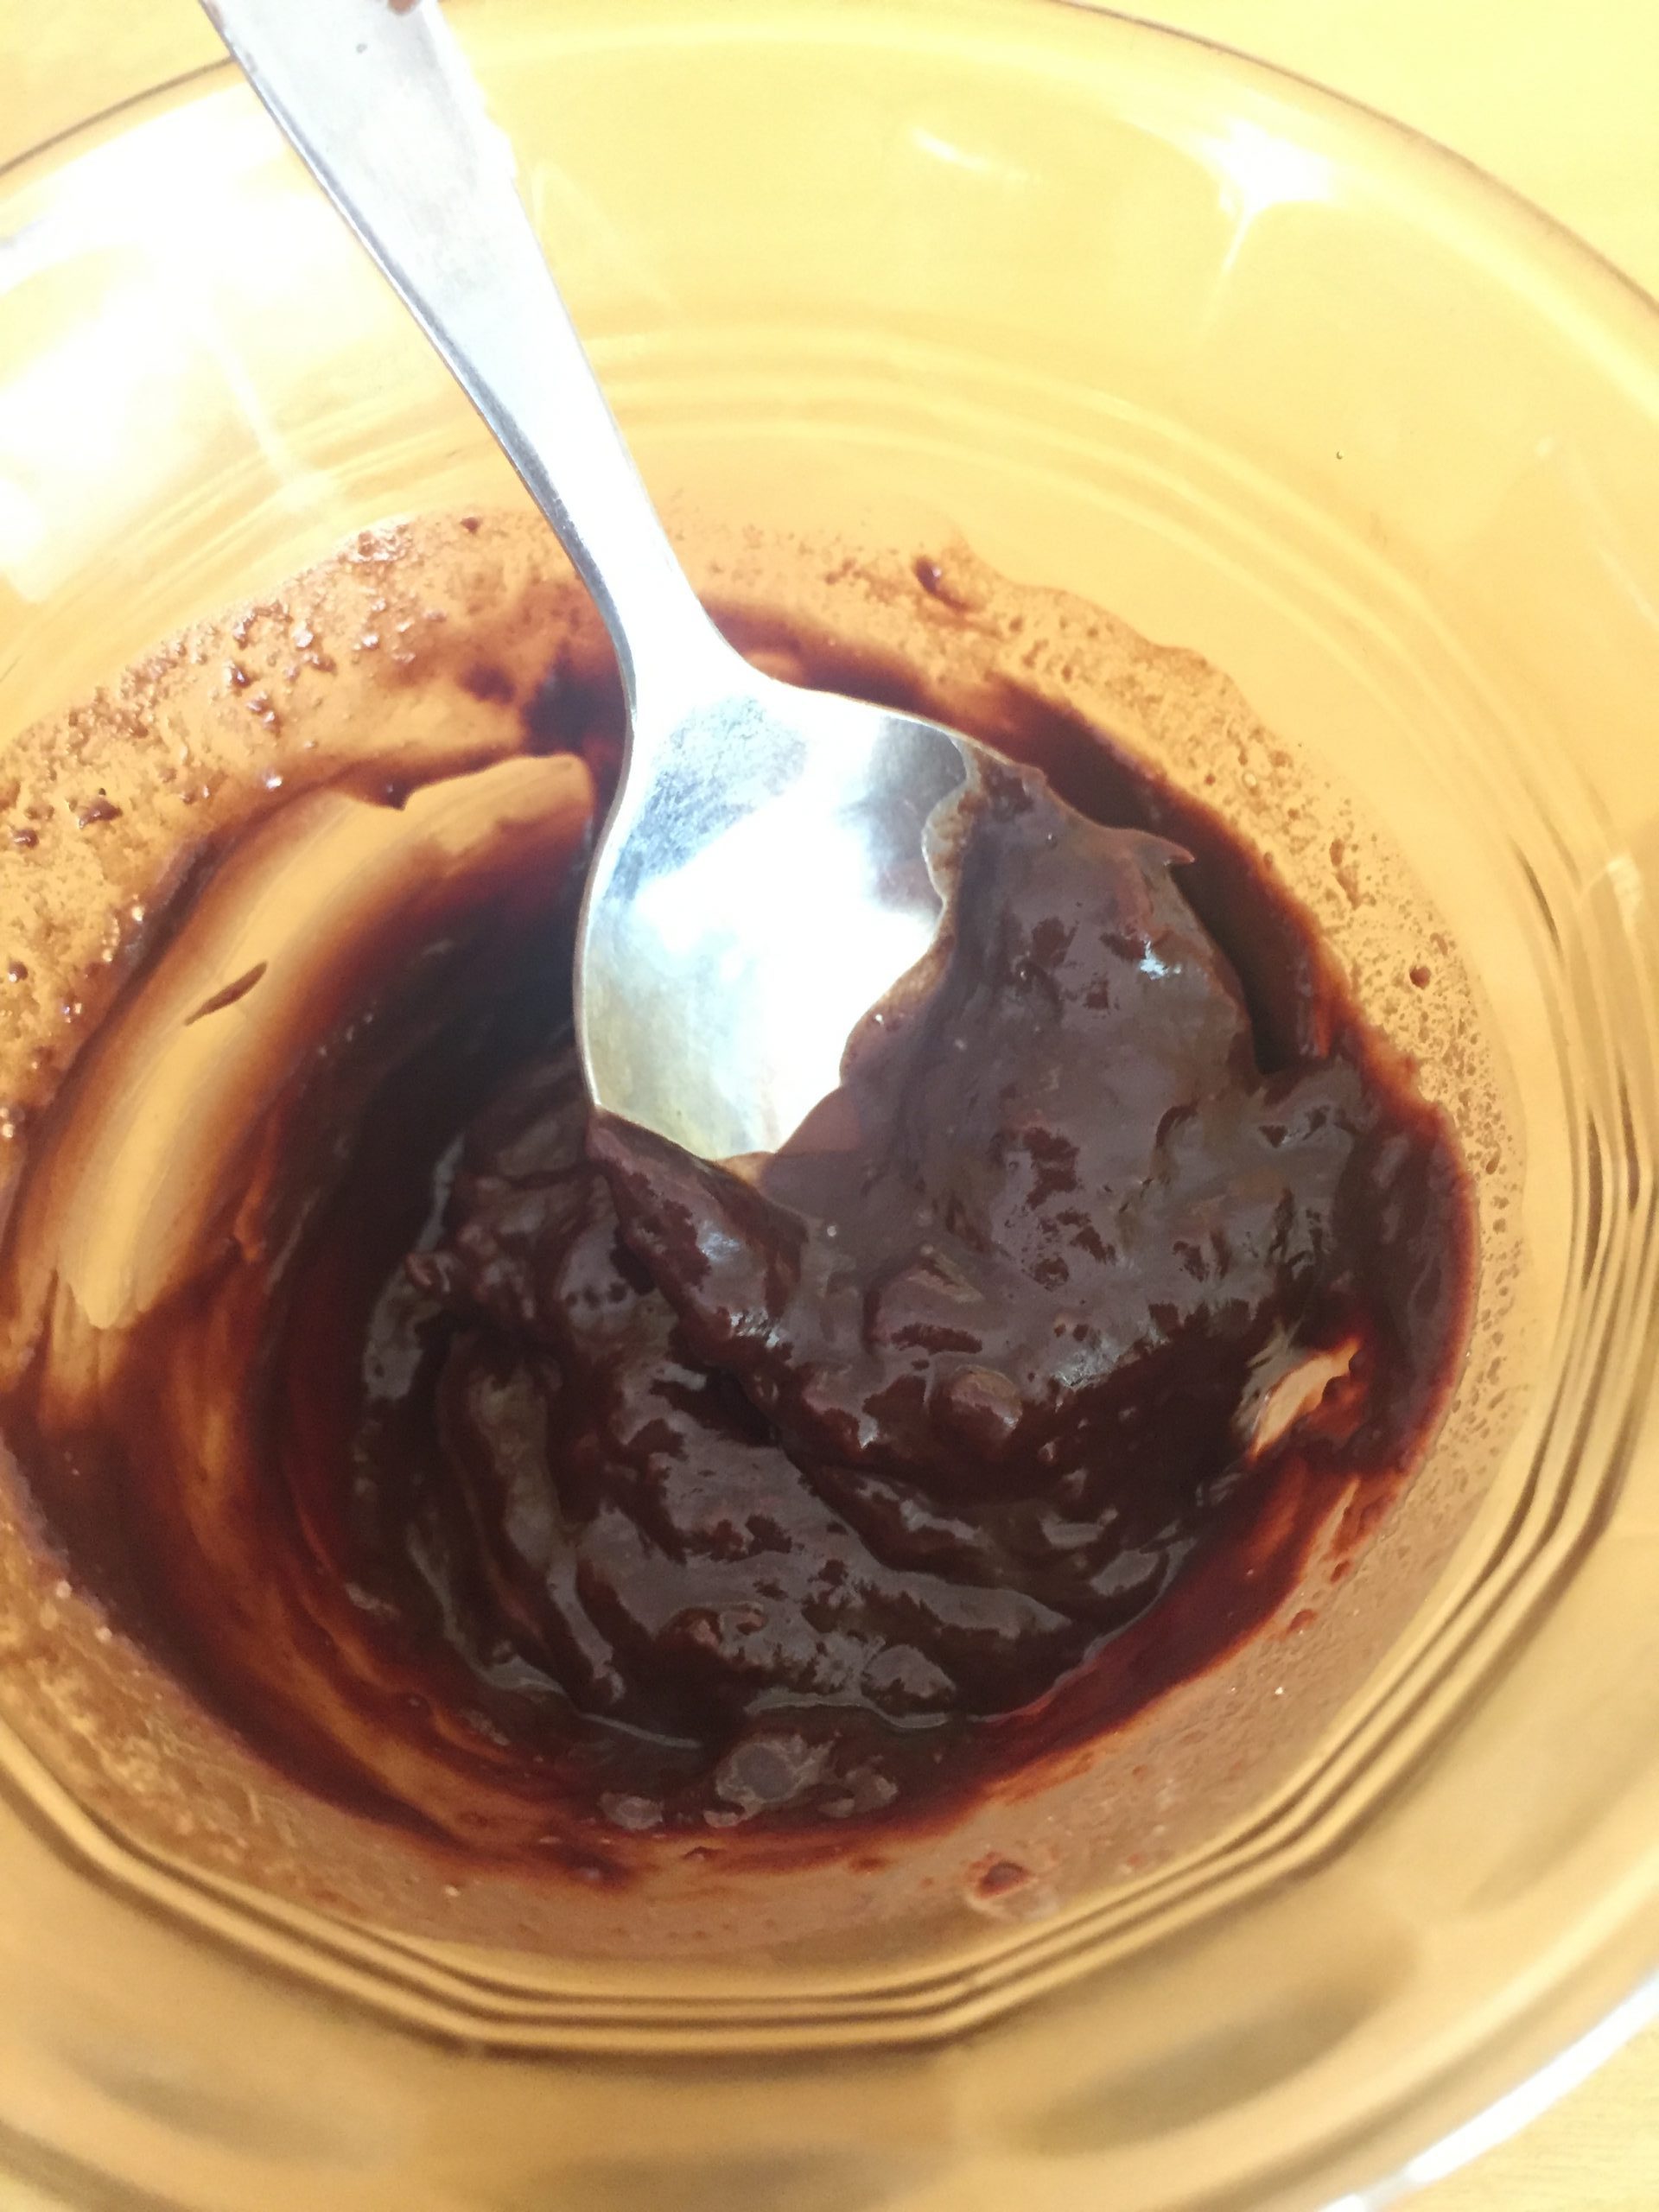 Melted chocolate with milk added after heating